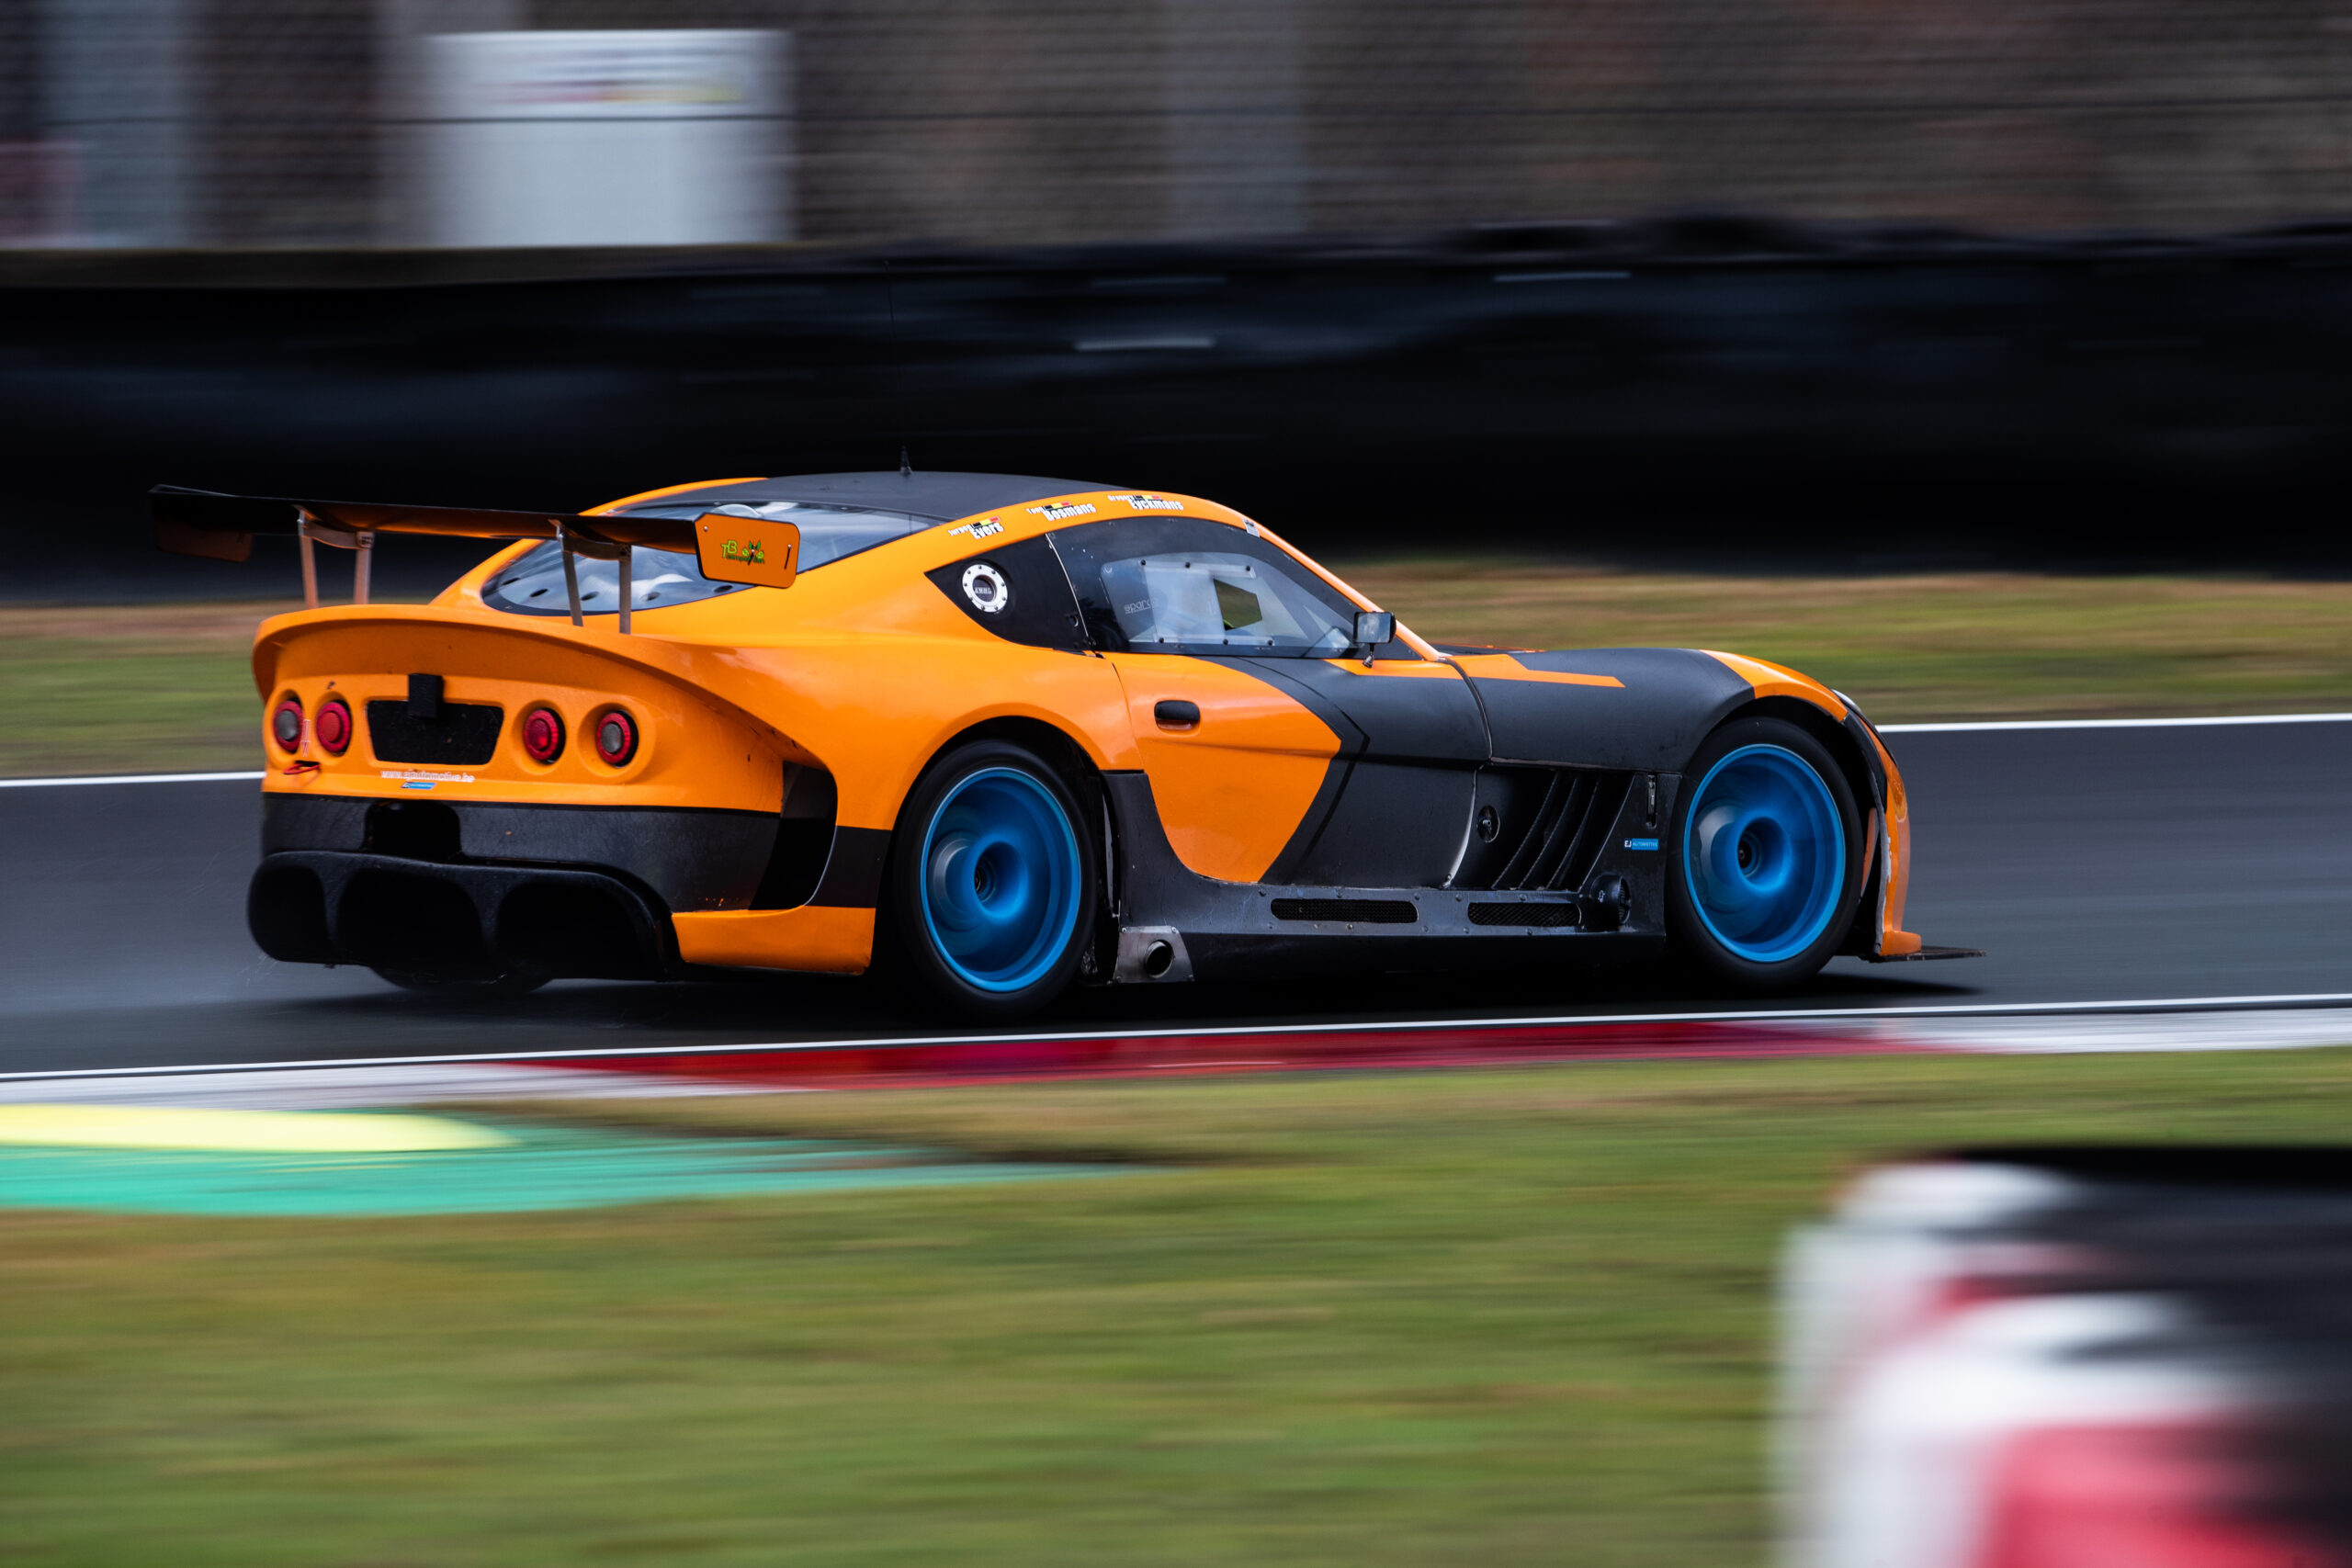 New for 2021… Ginetta G55